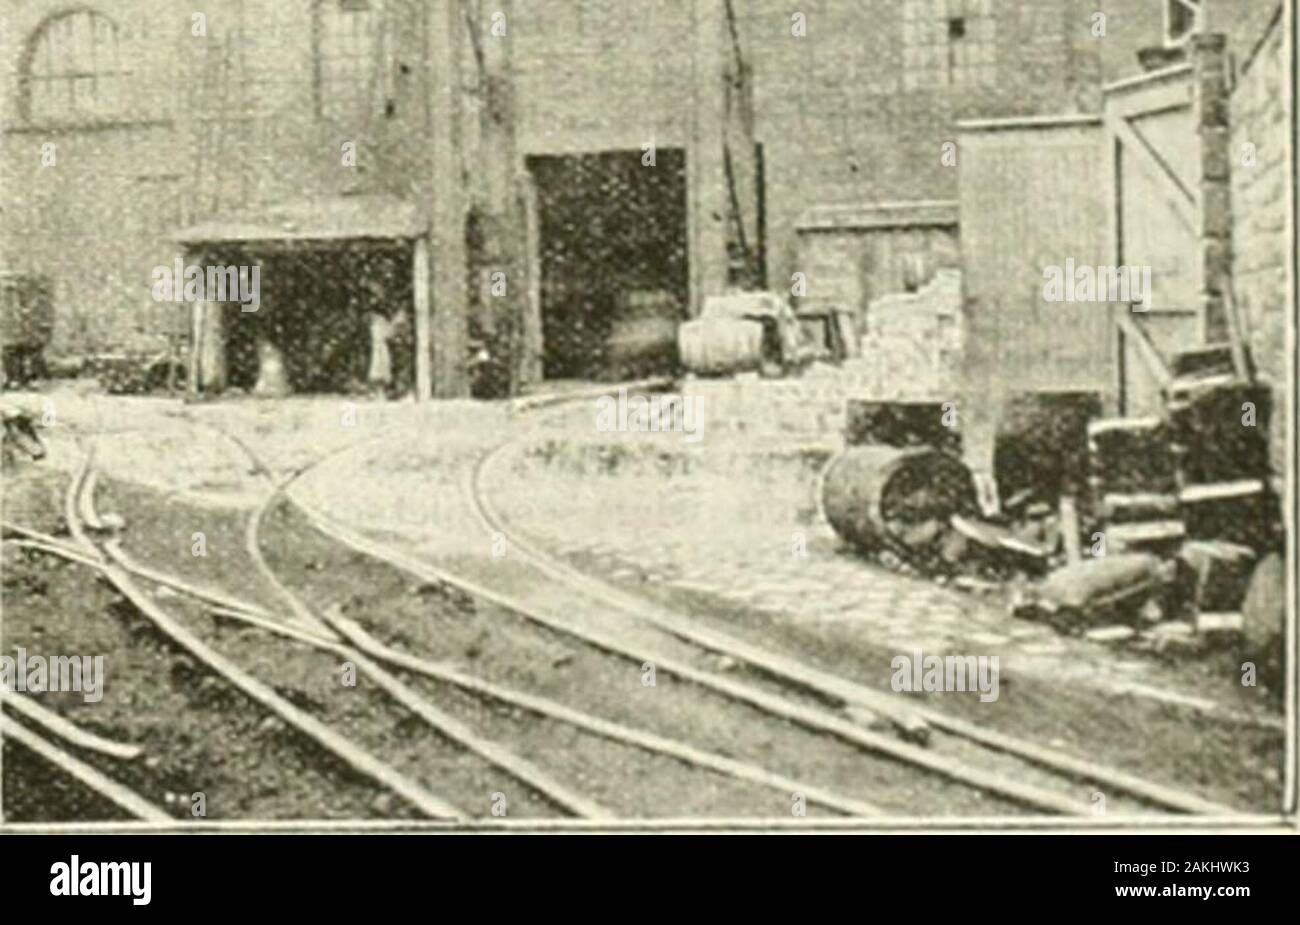 The Surveyor and municipal engineer . .^?r^^^ -1;. KiiiNBUiicir: EA.-iT End of Boiler-IIulsi; at the Ckxtii.il Electric Lighting Station, showing Ei.kctric Coai, Hoist and Aitomatio Wkighing Machink fob Railway Triiks. having a capacity of SoO ampere hours, at a discharge rate of 180 amperes. Tho Imtterios are always connected to the ouinibus bars on the switchboard, but, ns tho prossuio of tho dynamos is not sulliciont to charge all tho cells at onc«, motor generators or boosters are used ; these are put iu scriei with the dynamos, and are capable of iccnnsingtho prostnro of the battery circu Stock Photo